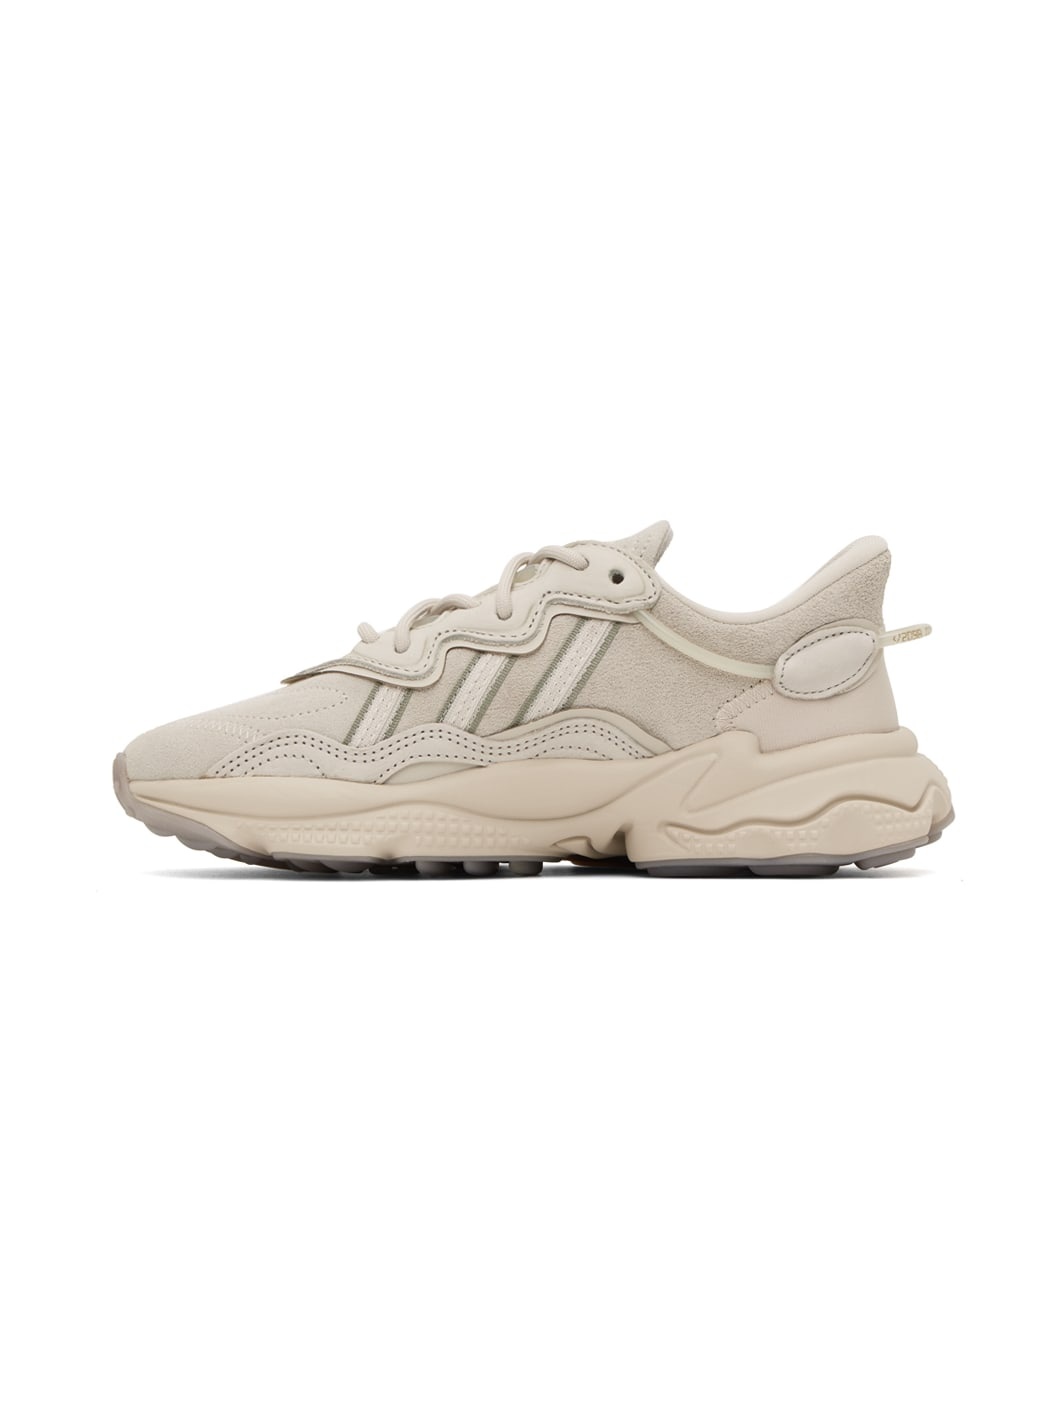 Off-White Ozweego Sneakers - 3